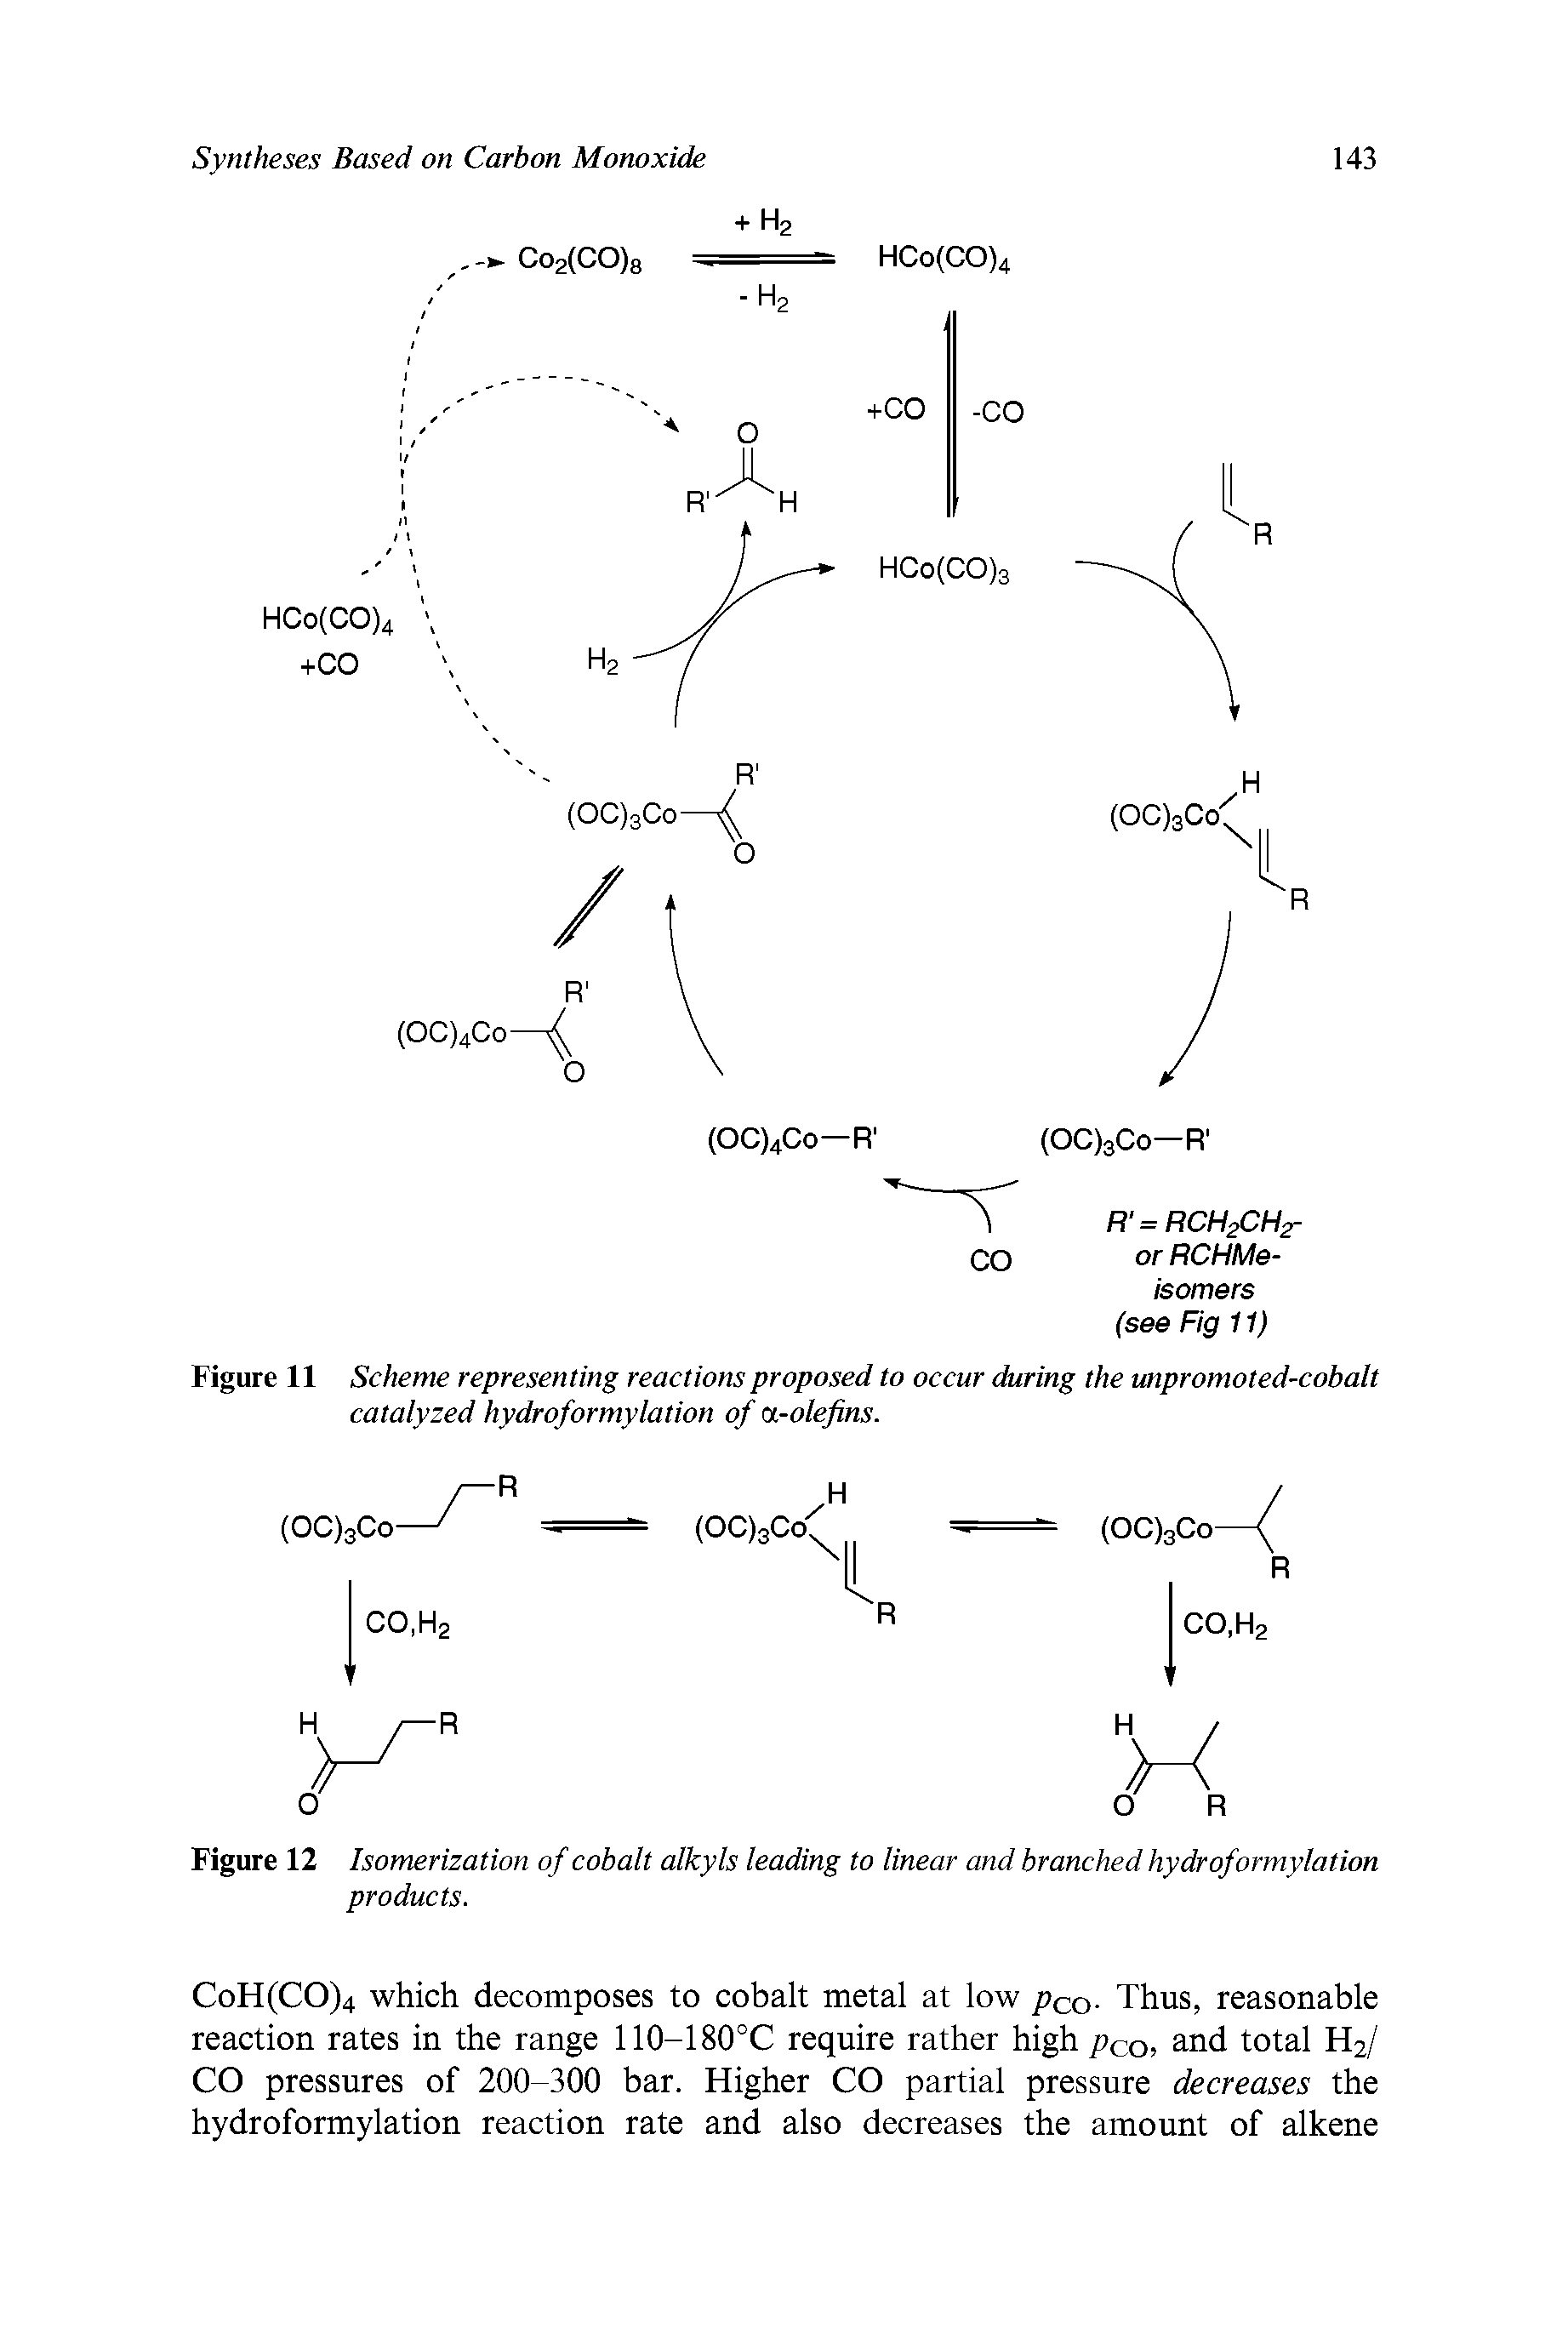 Figure 12 Isomerization of cobalt alkyls leading to linear and branched hydroformylation products.